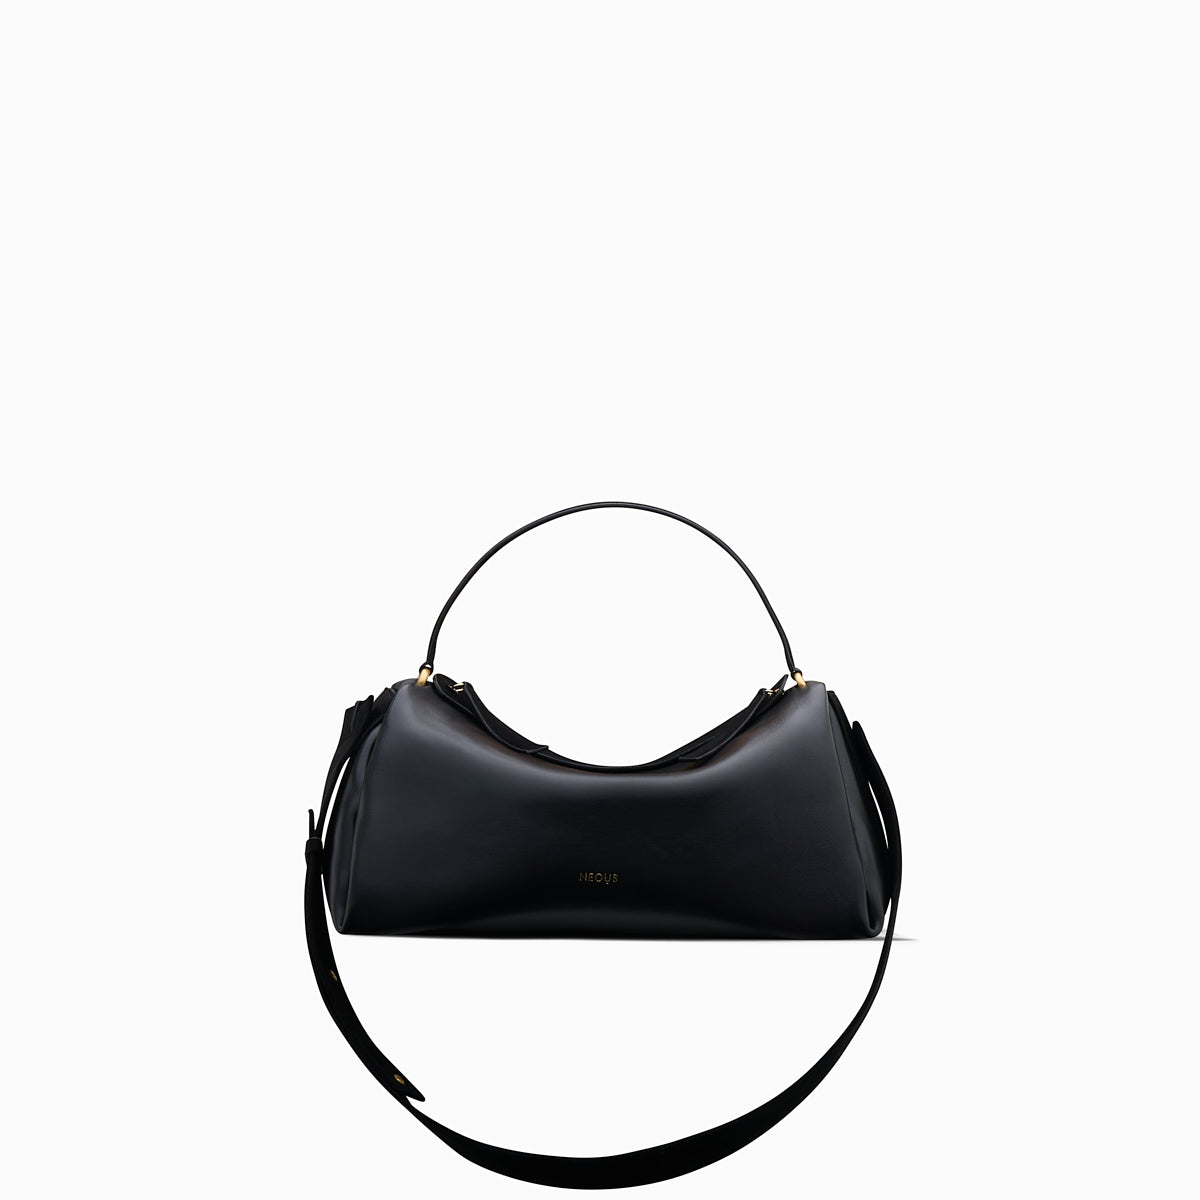 NEOUS Scorpius Leather Tote Bag | NEOUS Bags